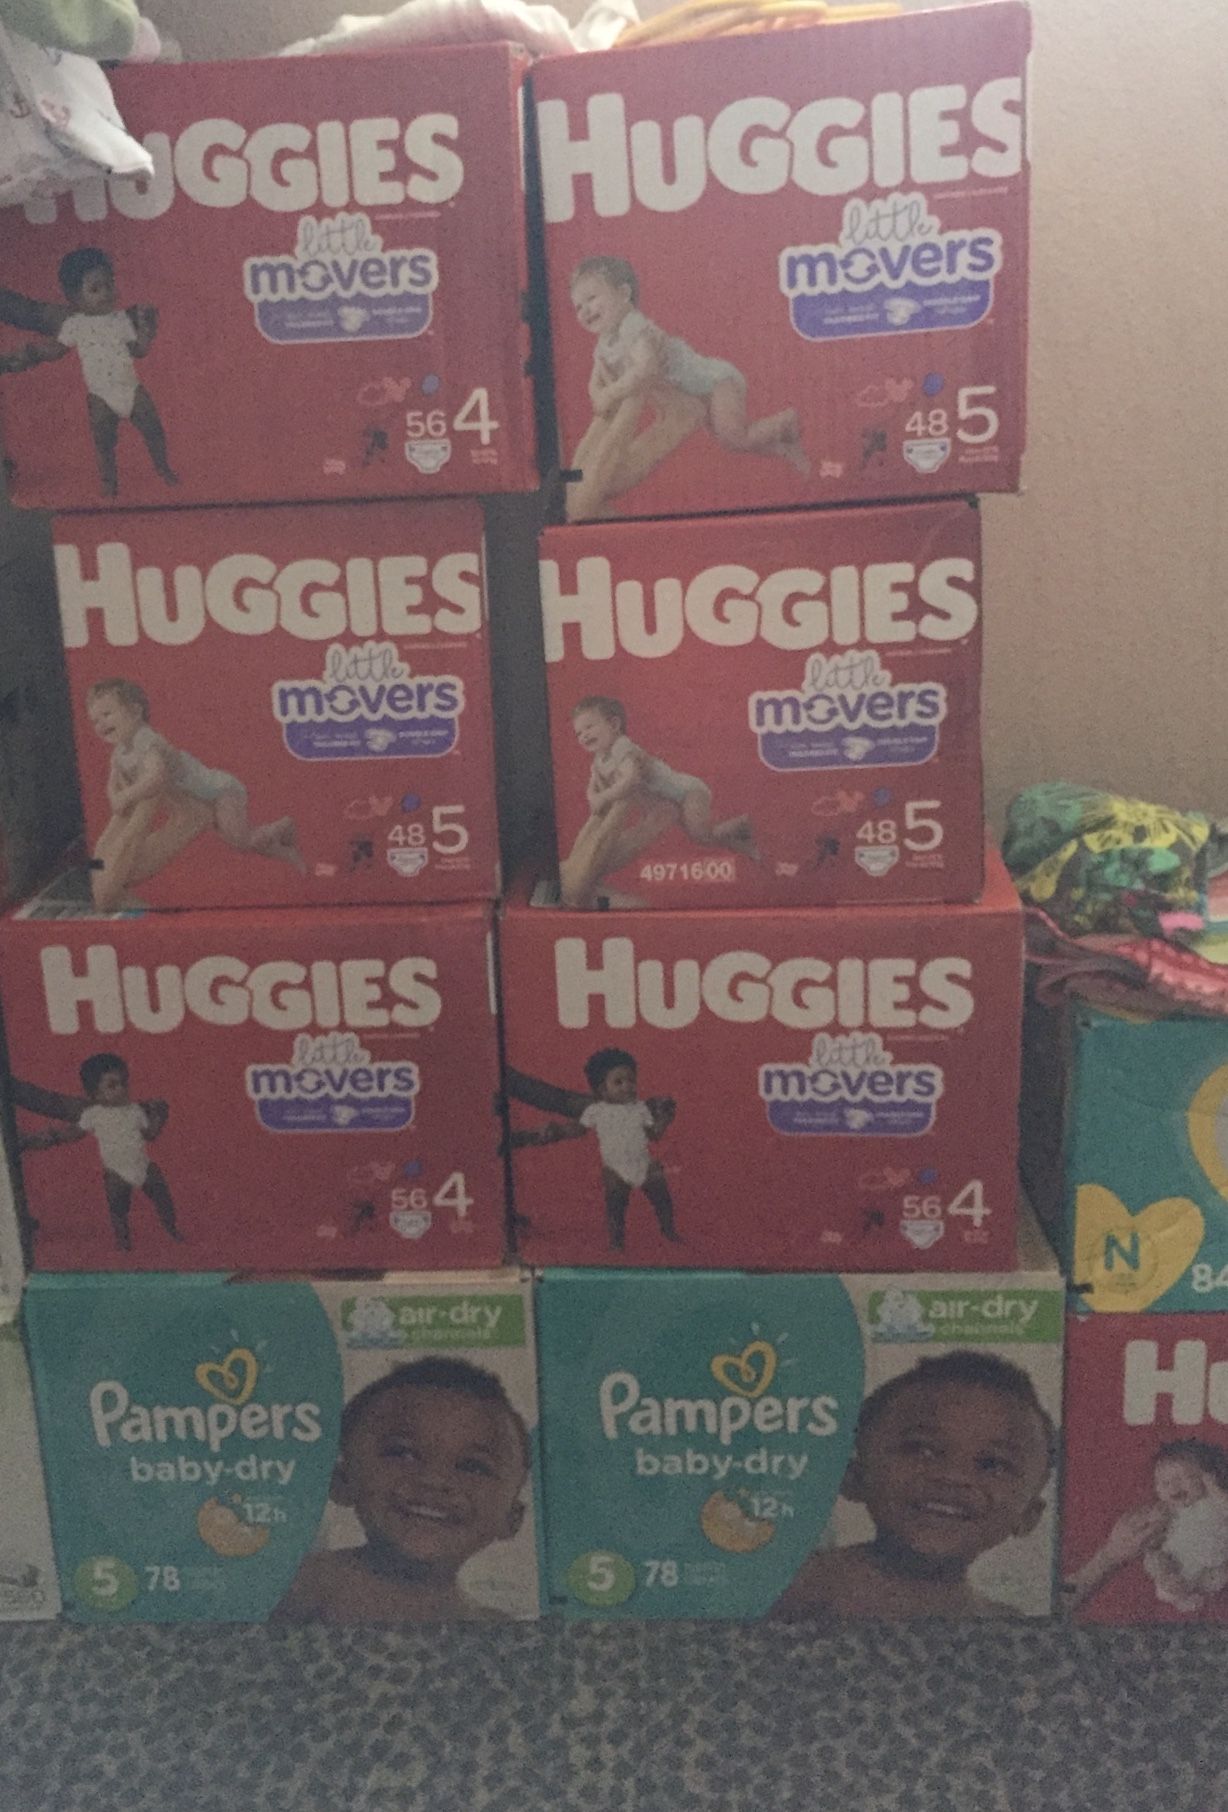 Huggies and Pampers